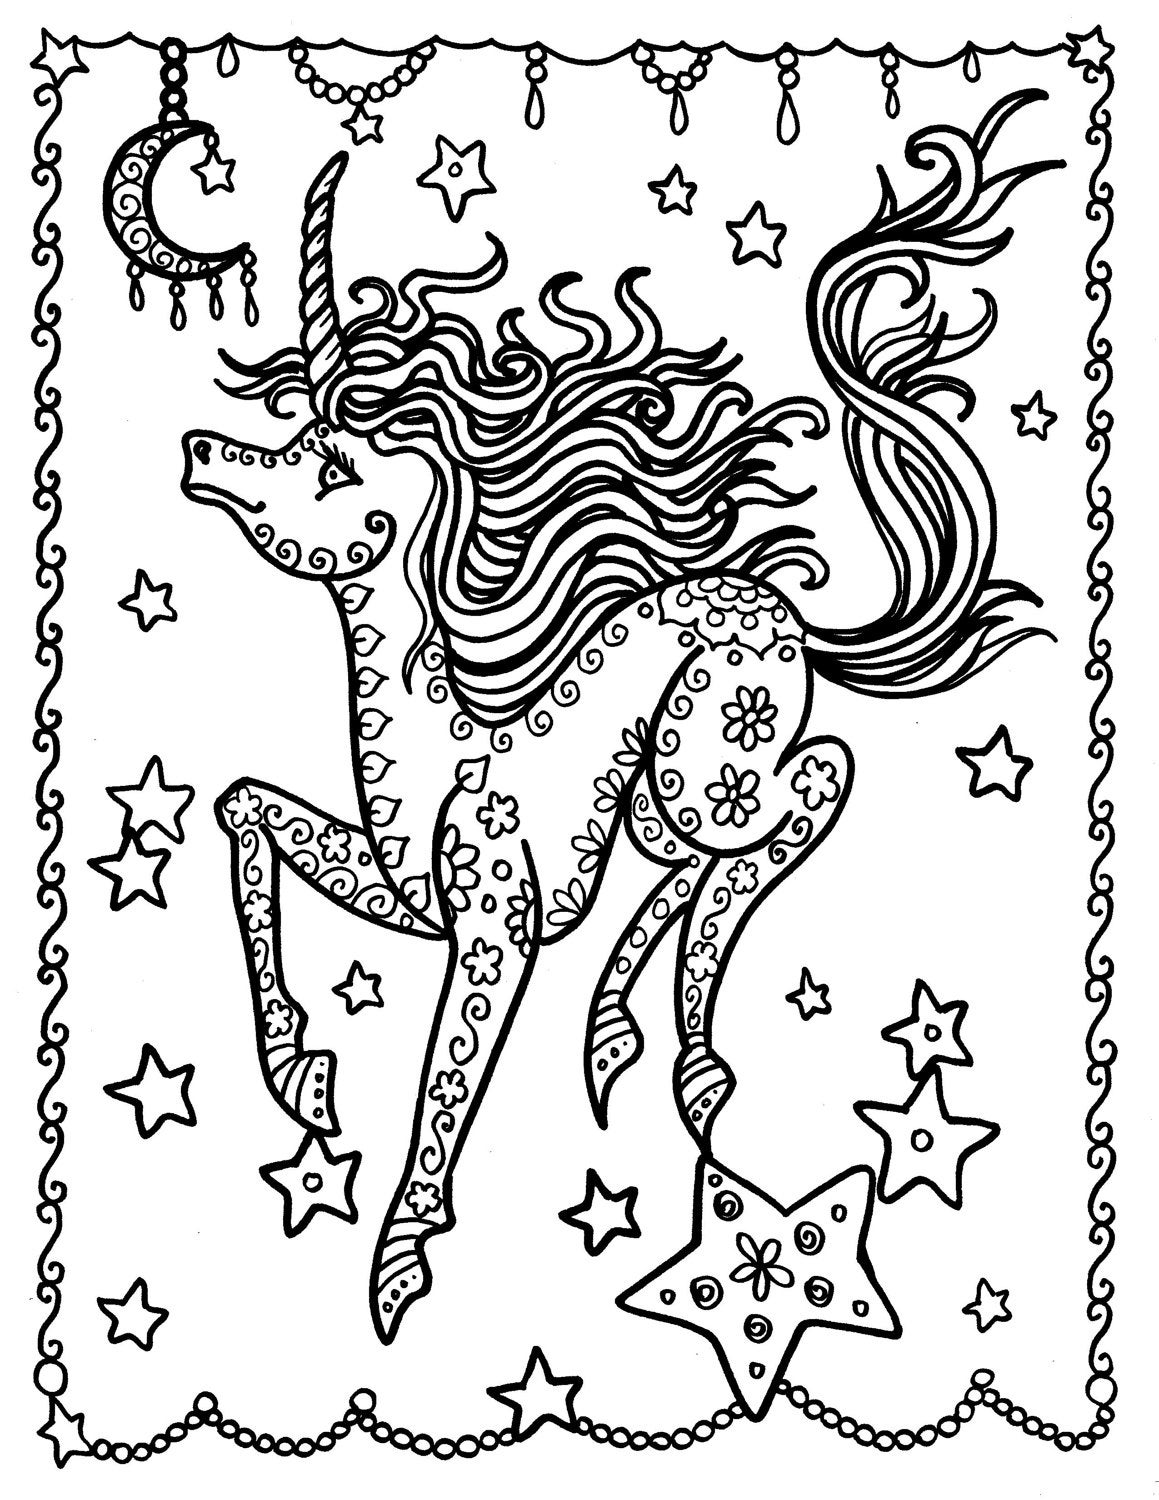 Unicorn Baby Coloring Page Fantasy coloring pages Adult